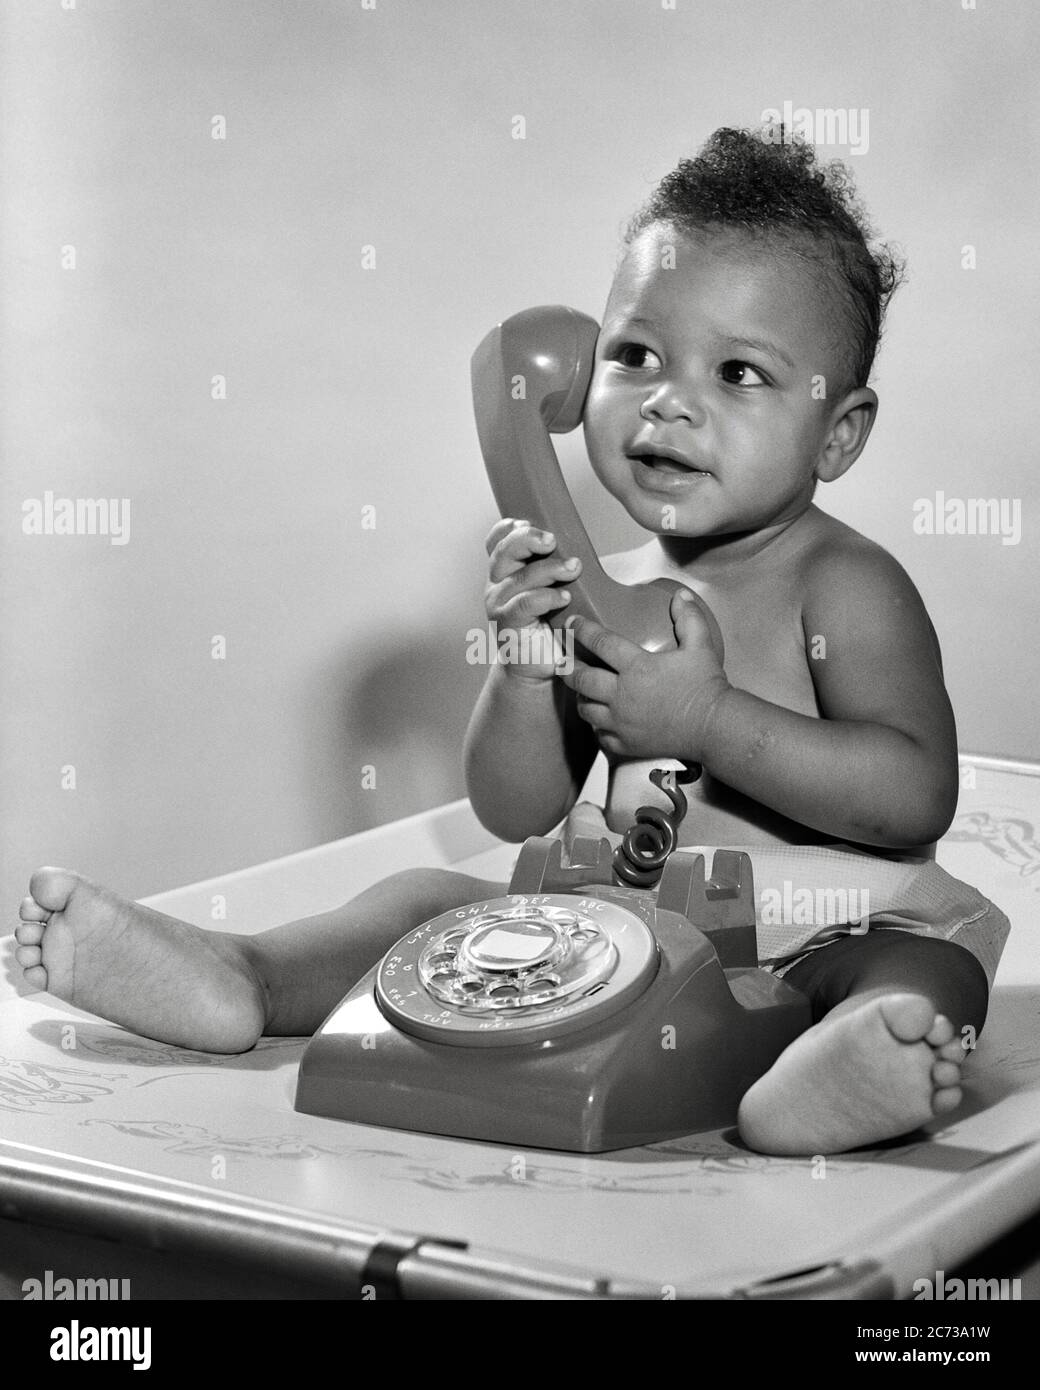 1950s 1960s SMILING AFRICAN AMERICAN BABY BOY SITTING UP HOLDING TELEPHONE HANDSET LISTENING - n42 CRS001 HARS CELEBRATION HEALTHINESS HOME LIFE COPY SPACE FULL-LENGTH MALES CONFIDENCE EXPRESSIONS B&W HAPPINESS CHEERFUL STRENGTH STRATEGY CUSTOMER SERVICE AFRICAN-AMERICANS AFRICAN-AMERICAN EXCITEMENT BLACK ETHNICITY PRIDE UP POLITICS SMILES CONNECTION CONCEPTUAL JOYFUL STYLISH HANDSET BABY BOY GROWTH JUVENILES RELAXATION BLACK AND WHITE OLD FASHIONED AFRICAN AMERICANS Stock Photo